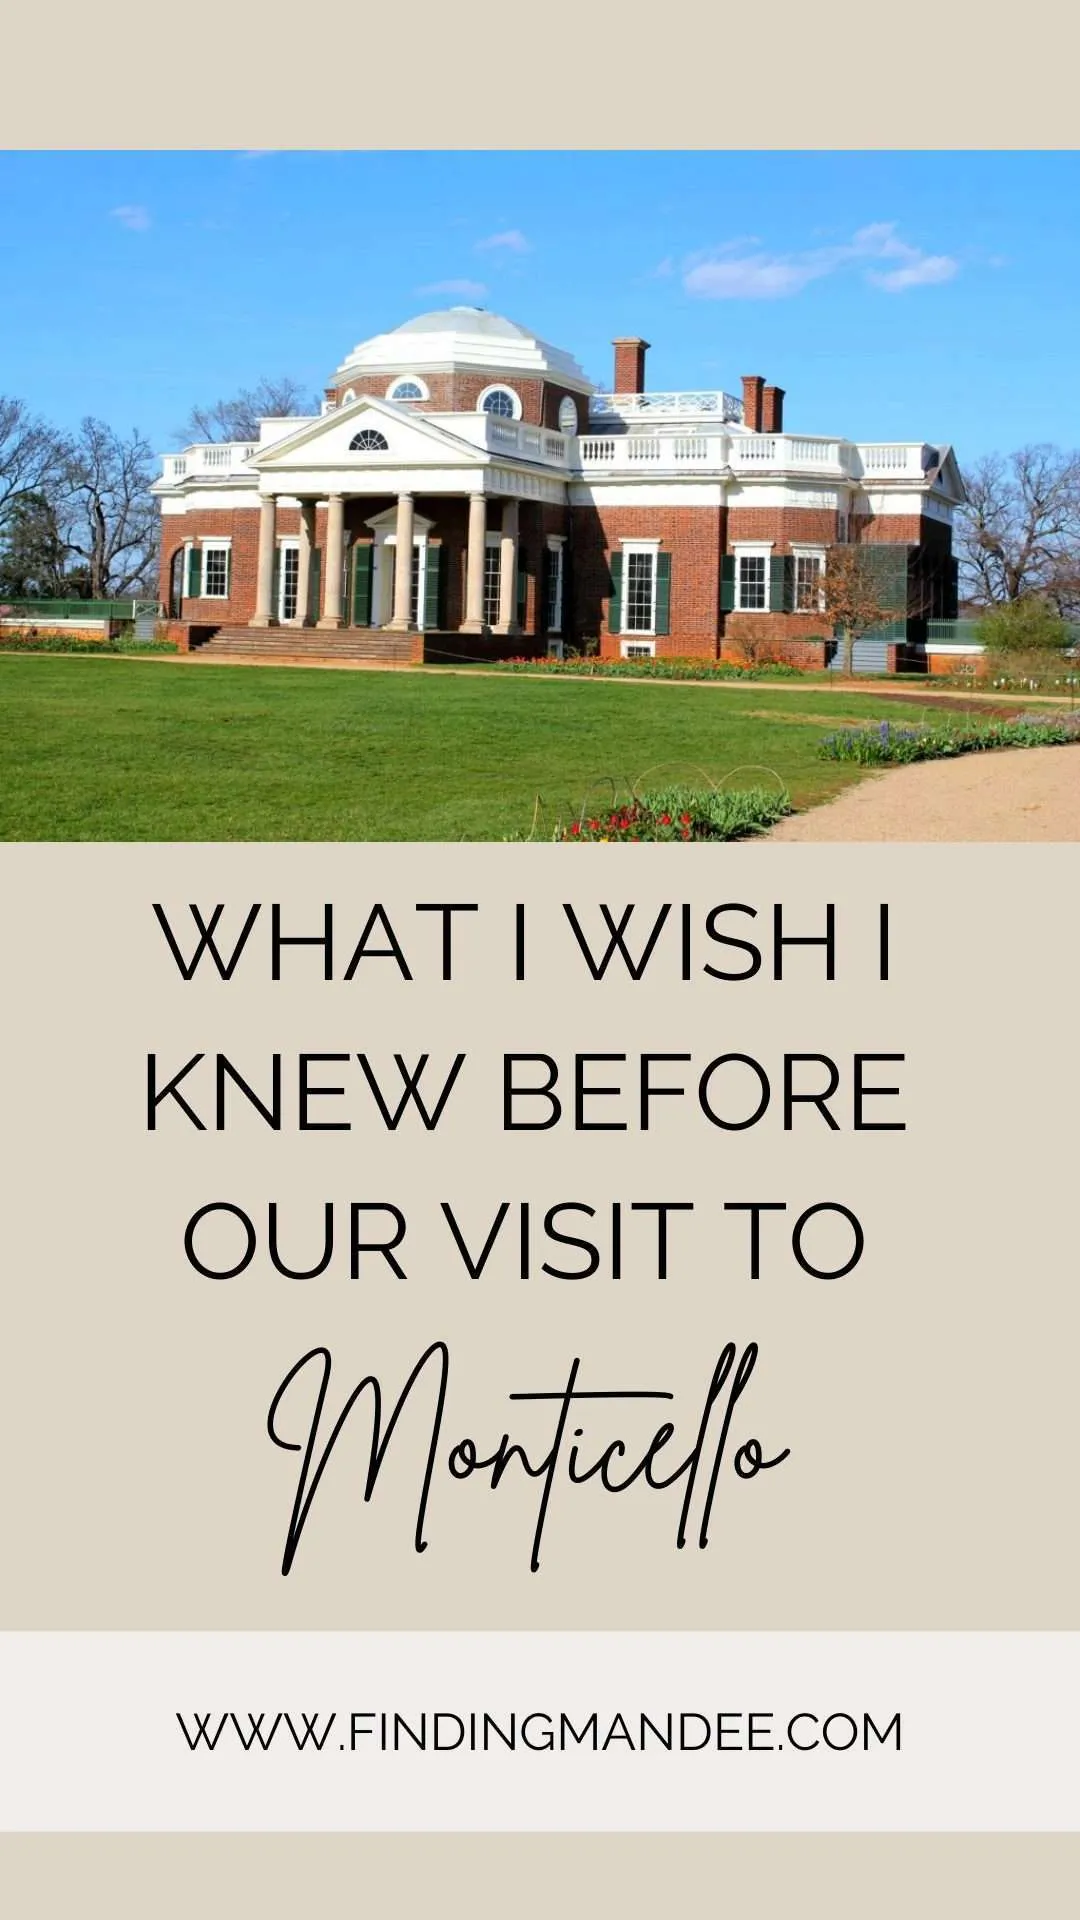 What I Wish I Knew Before Our Visit to Monticello